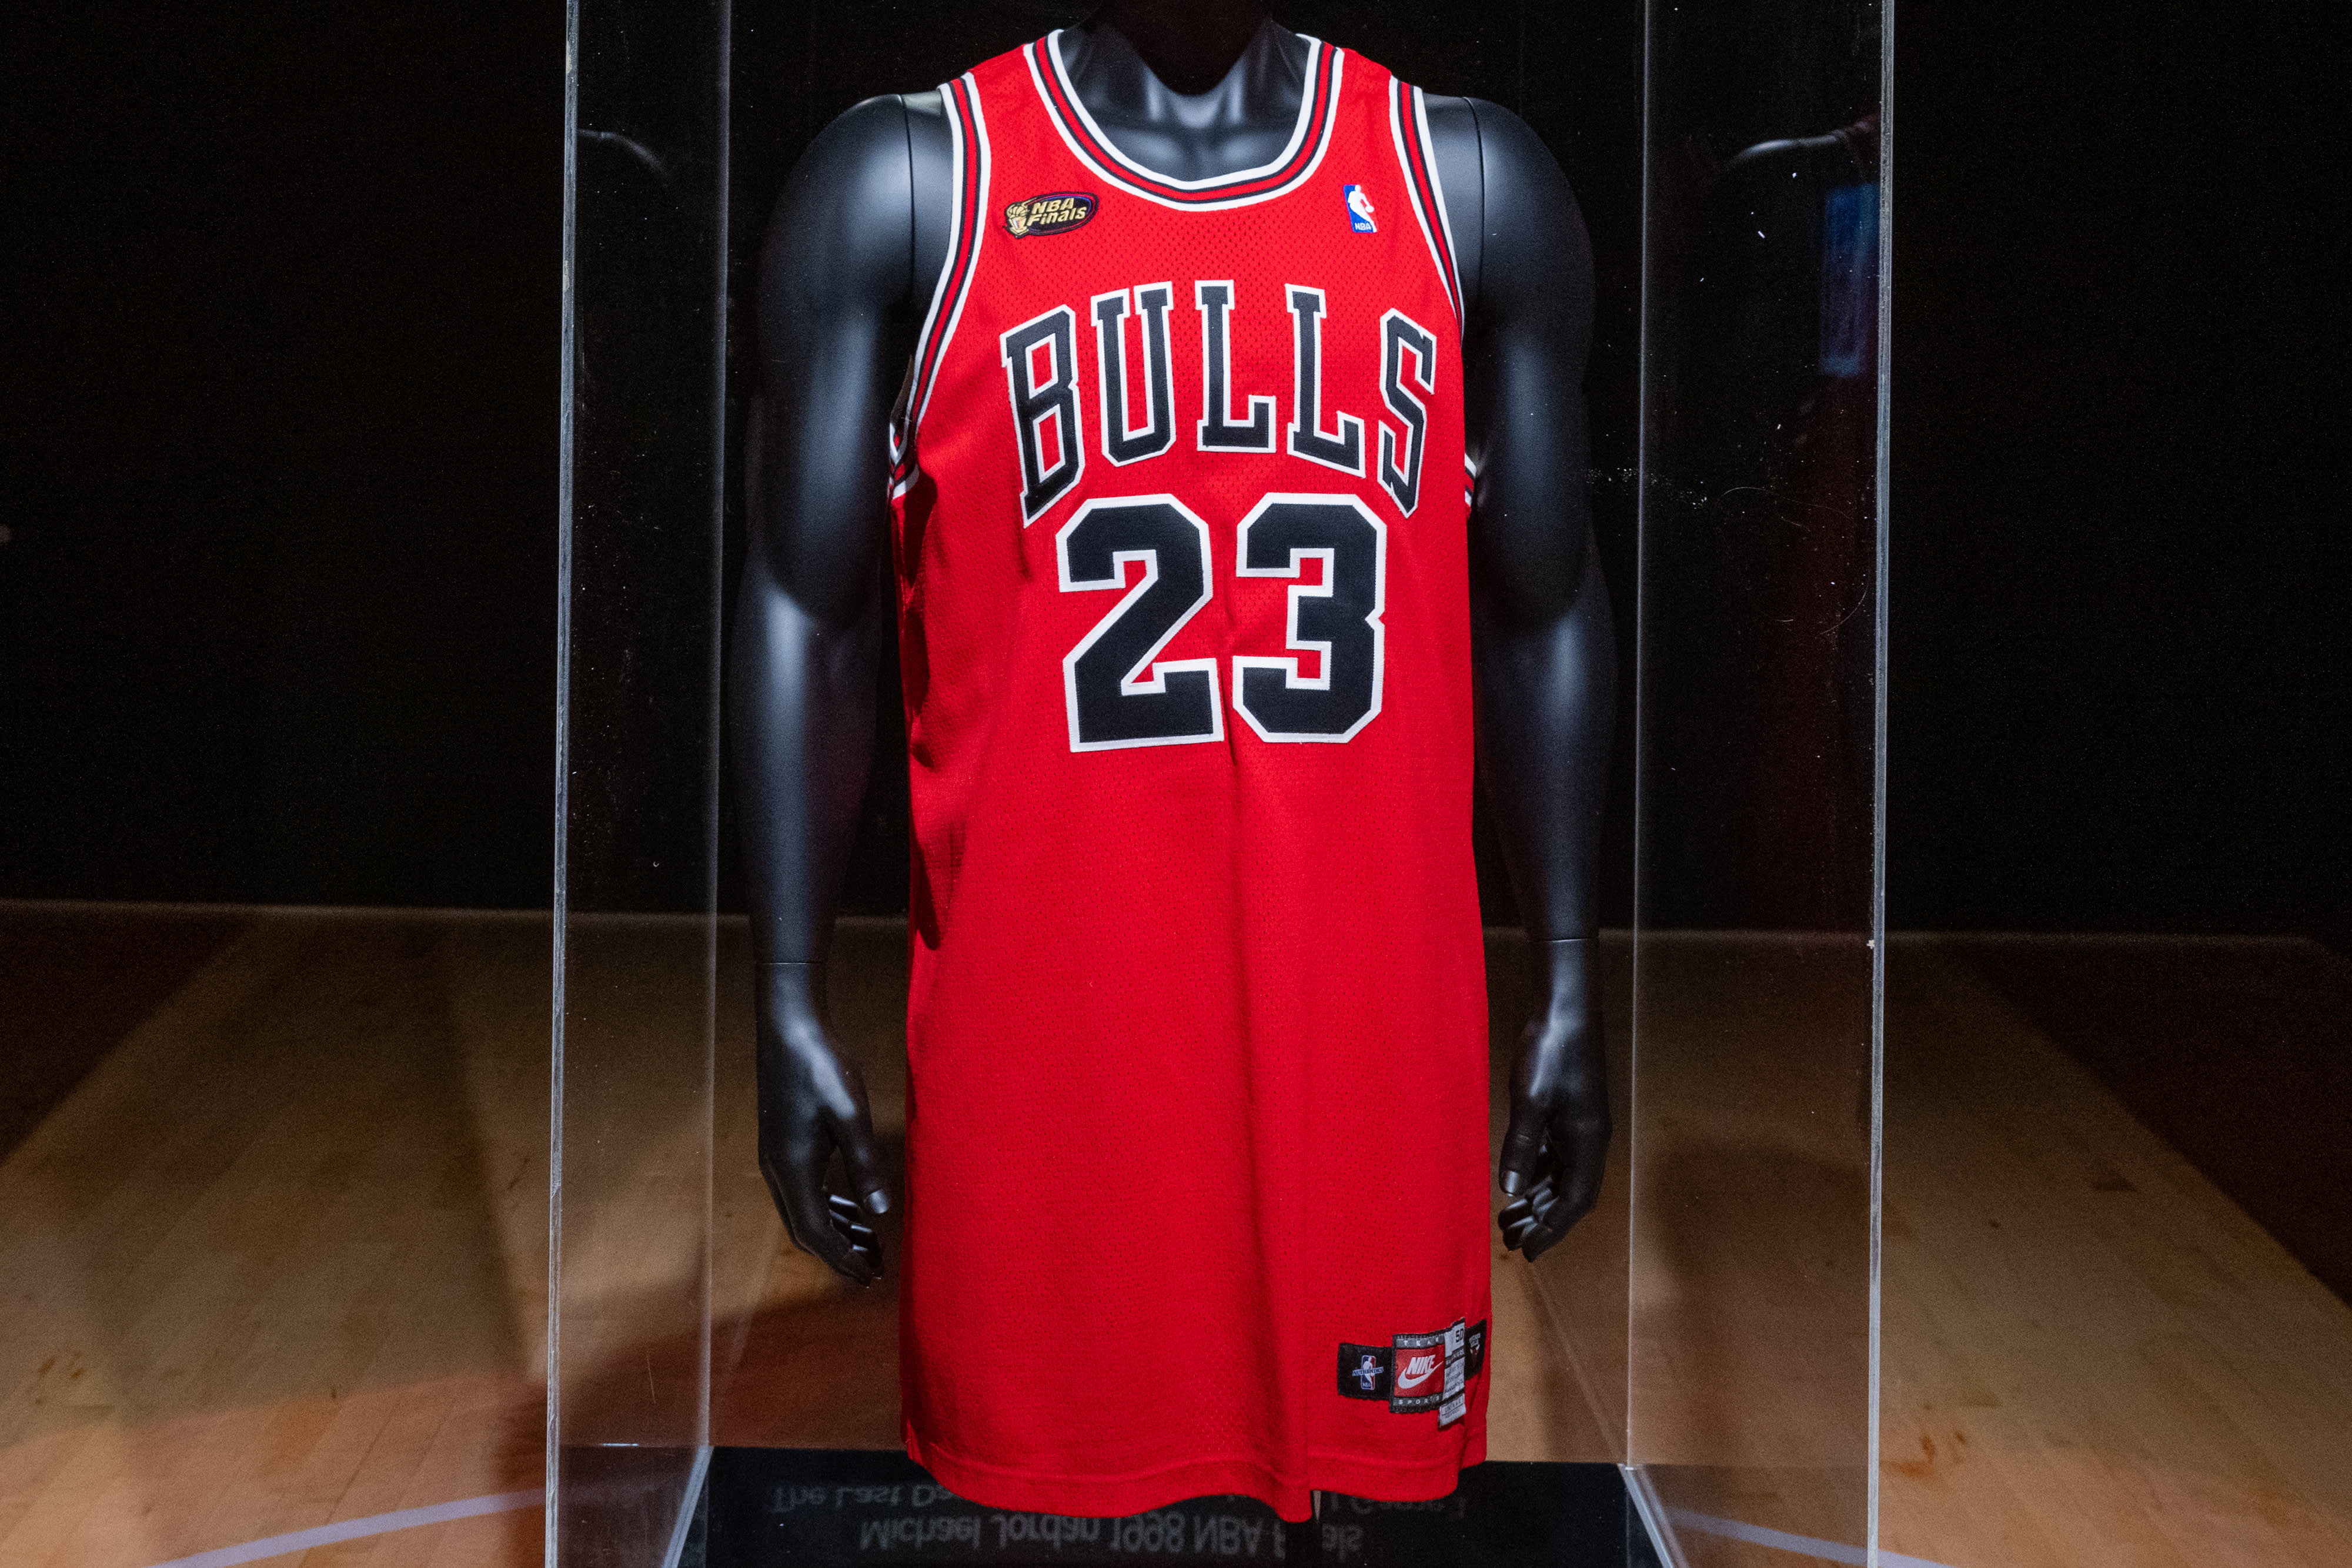 Michael Jordan’s game-worn 1998 NBA Finals ‘The Last Dance’ jersey from game 1 is on display during a press preview at Sotheby's on September 06, 2022 in New York City. The jersey is expected to achieve $3-5 million during the Invictus sports auction which will be held from September 6-14.